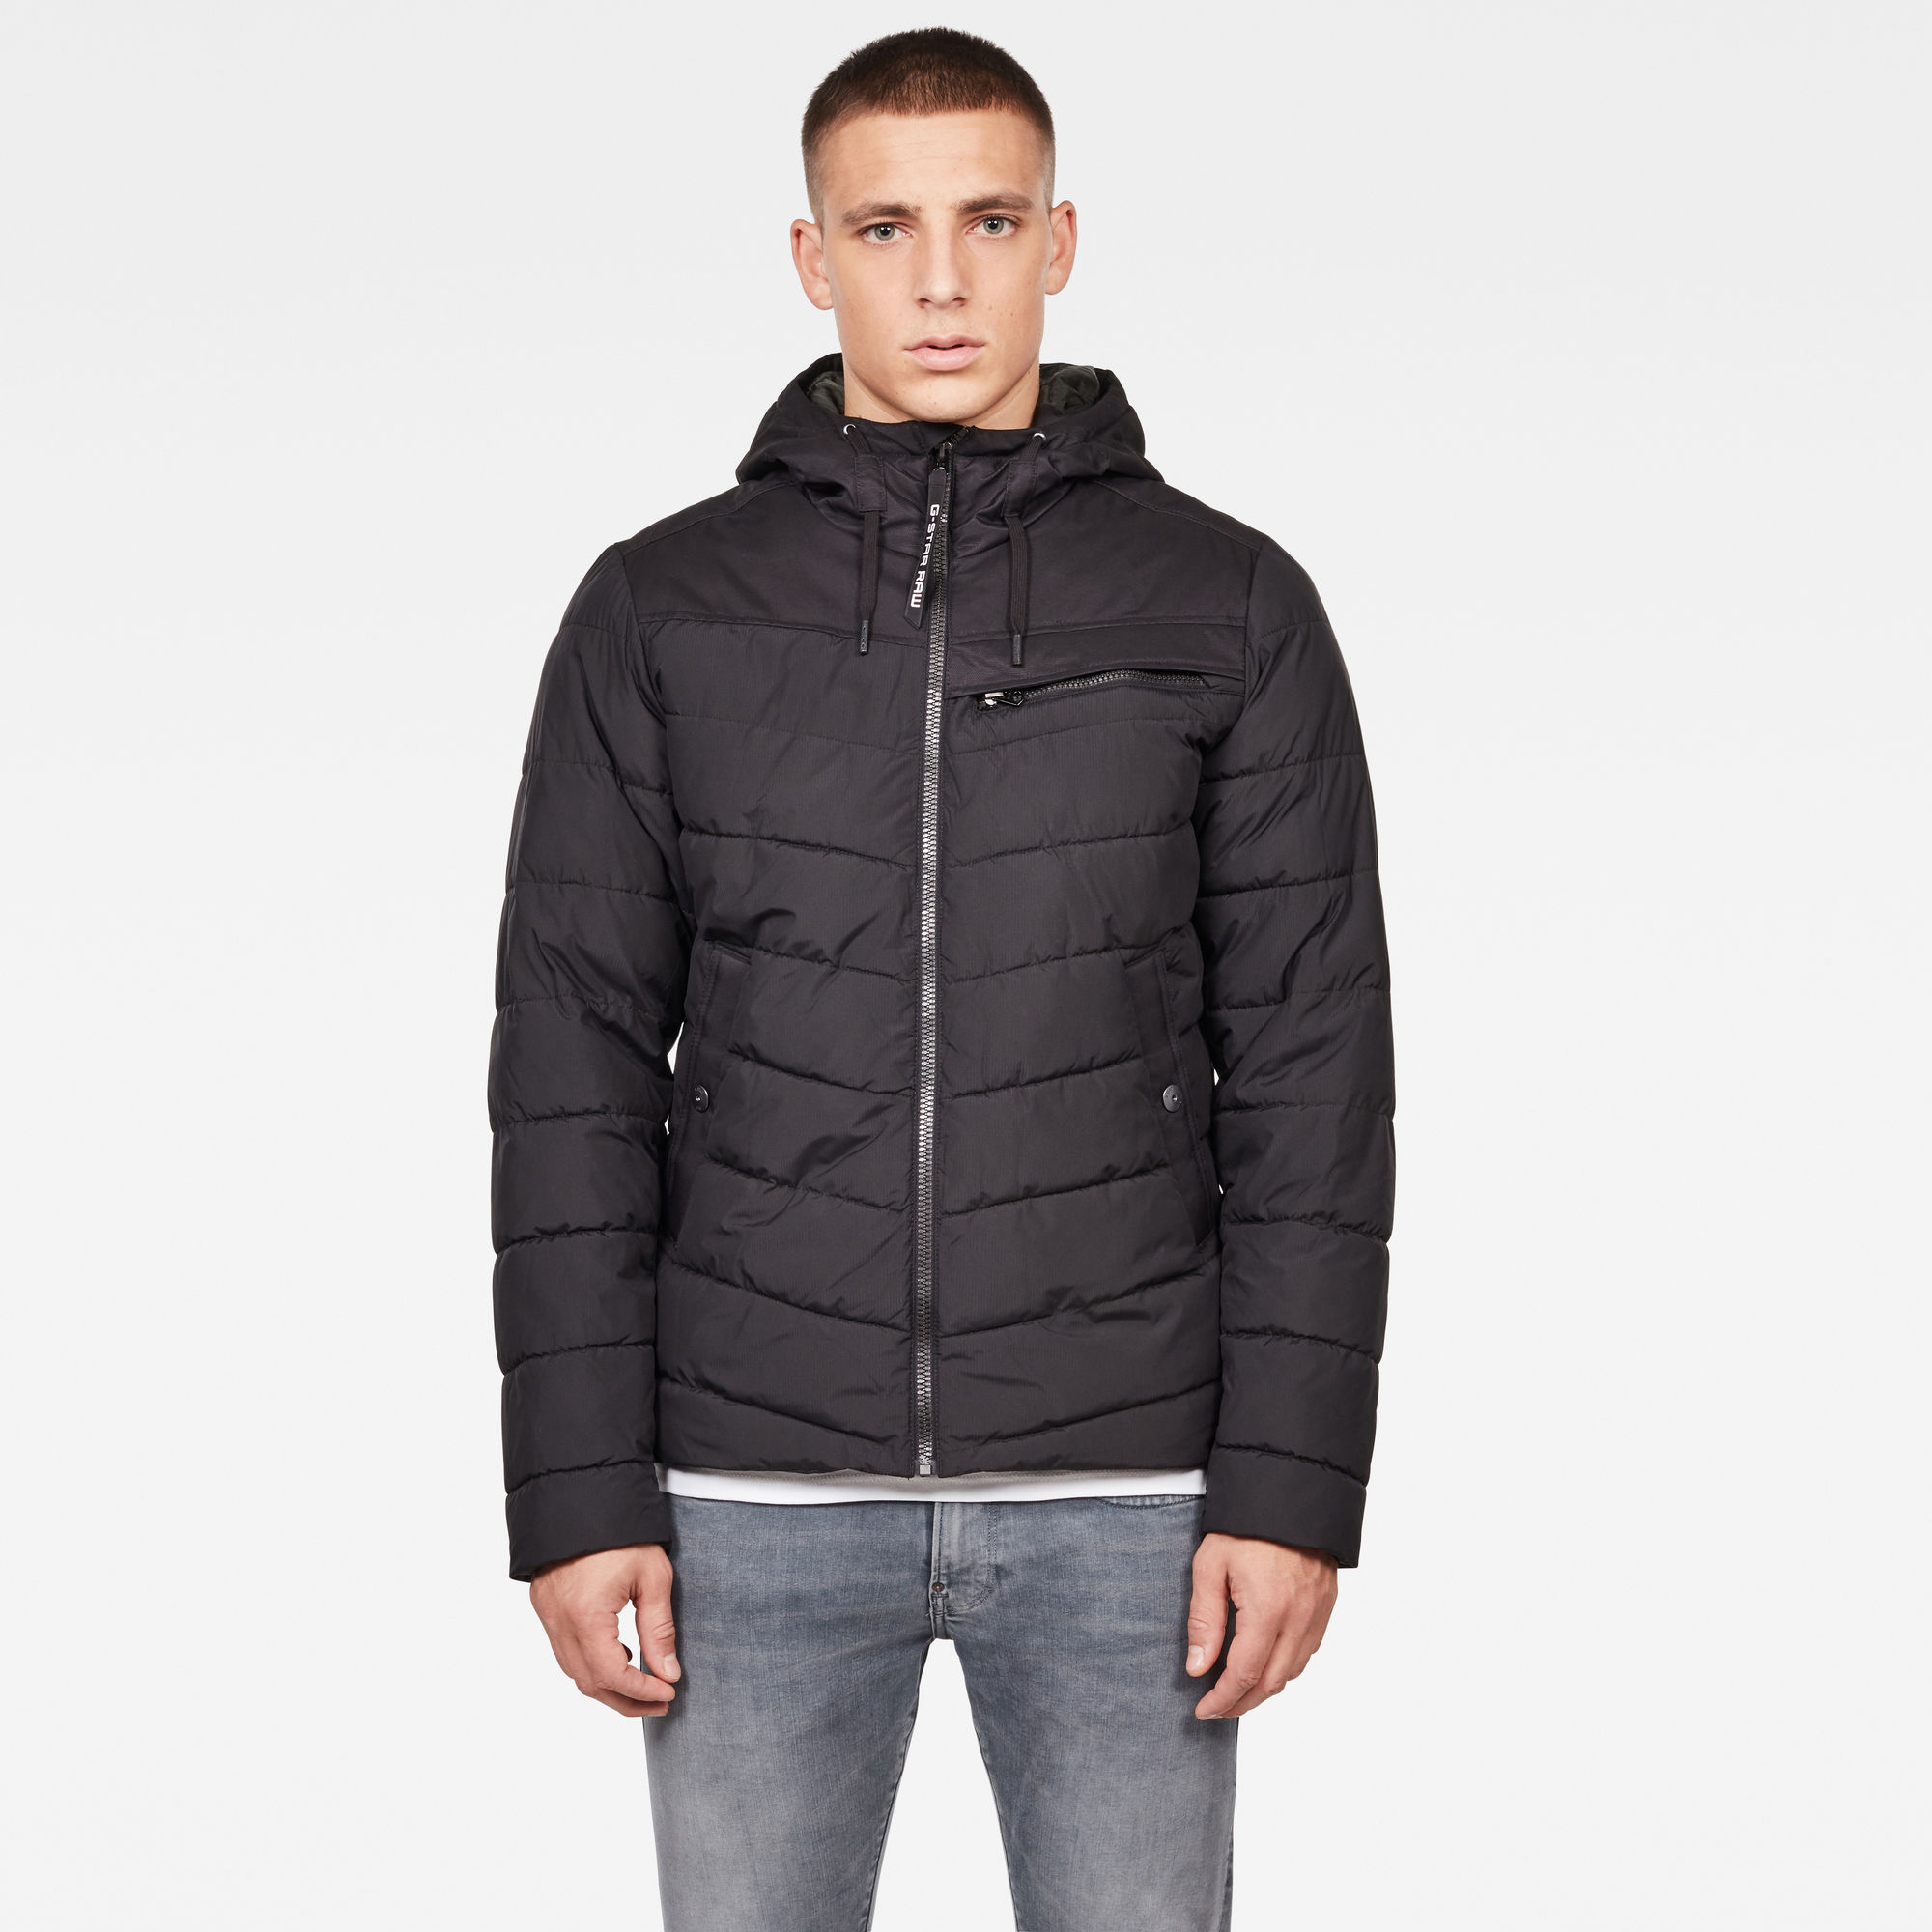 Attacc Quilted Jacket | Black | G-Star RAW®